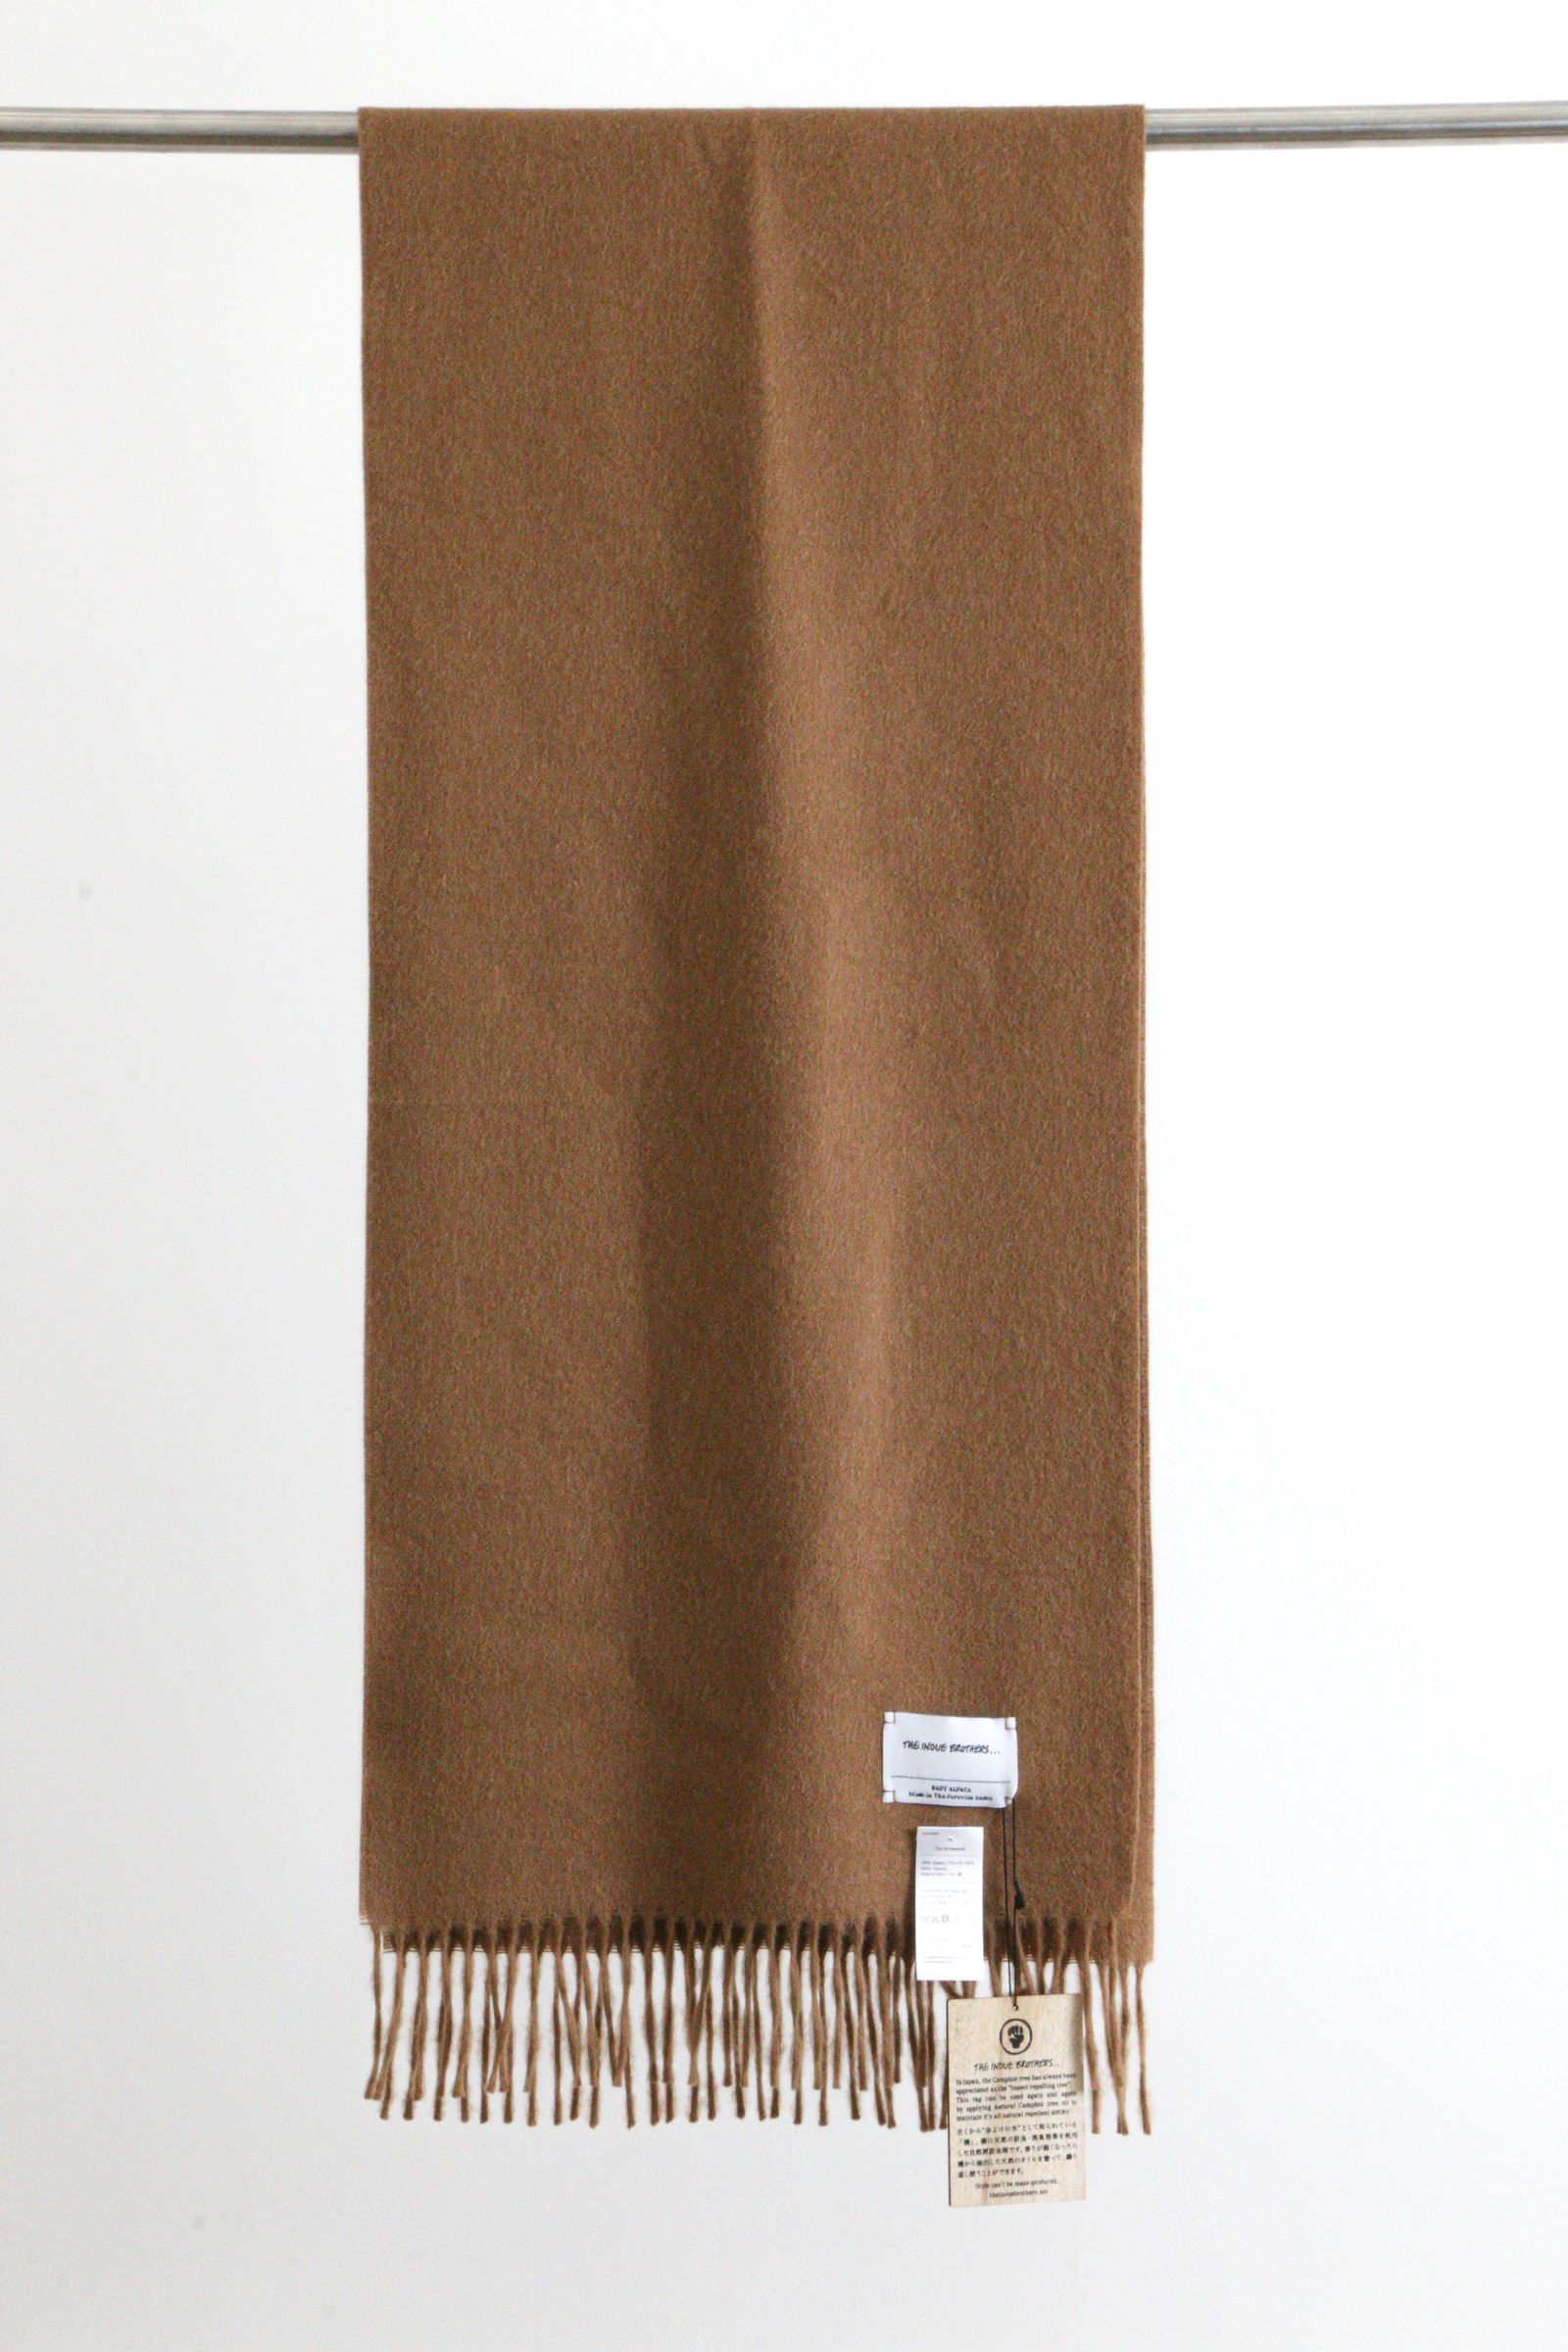 THE INOUE BROTHERS - Brushed Scarf Camel / マフラー 